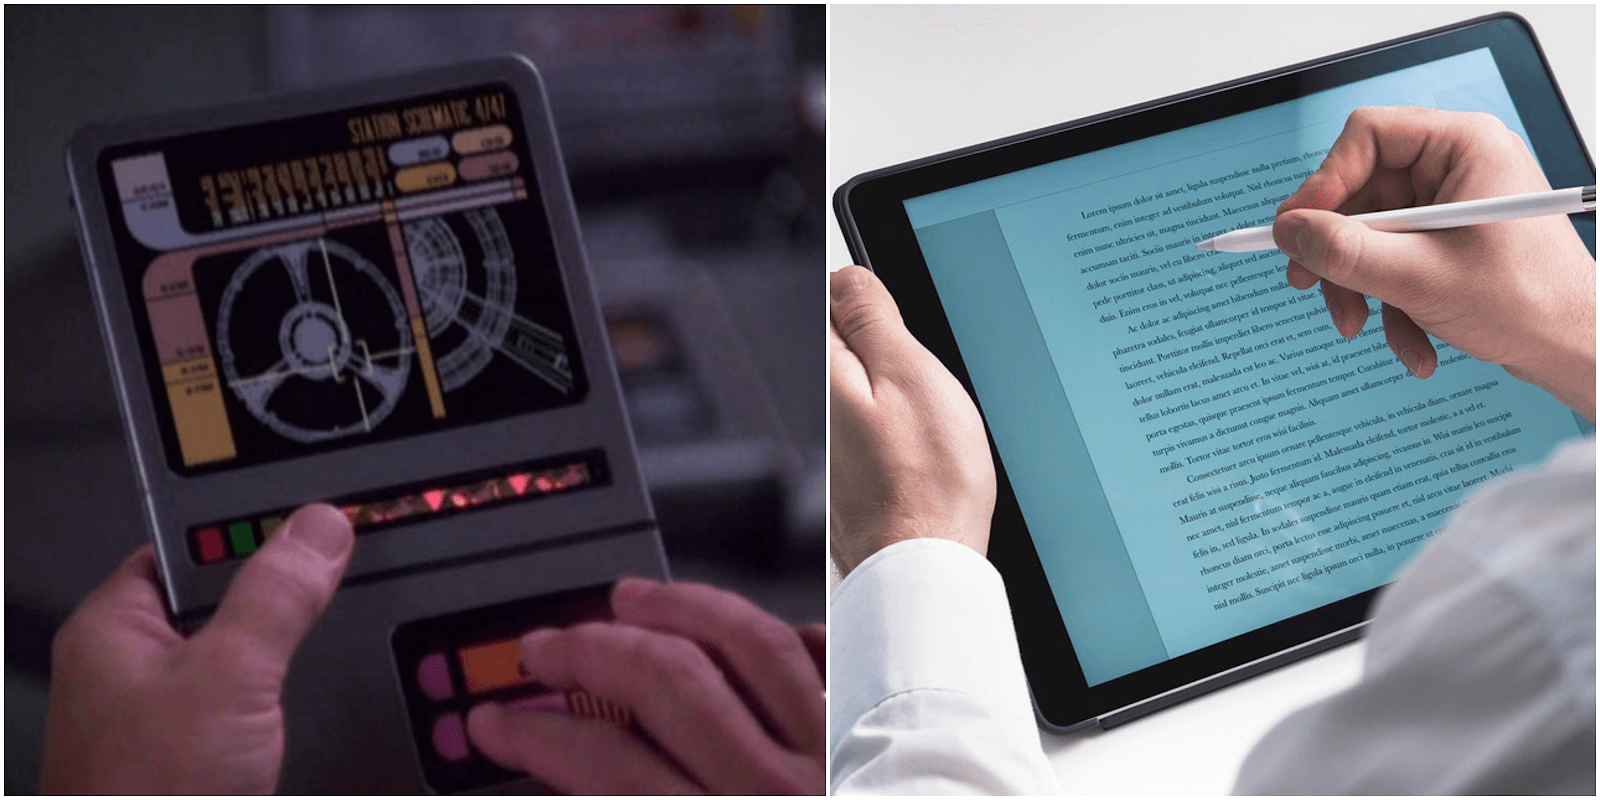 Top 10 Inventions Inspired By Science Fiction Movies And Novels ...